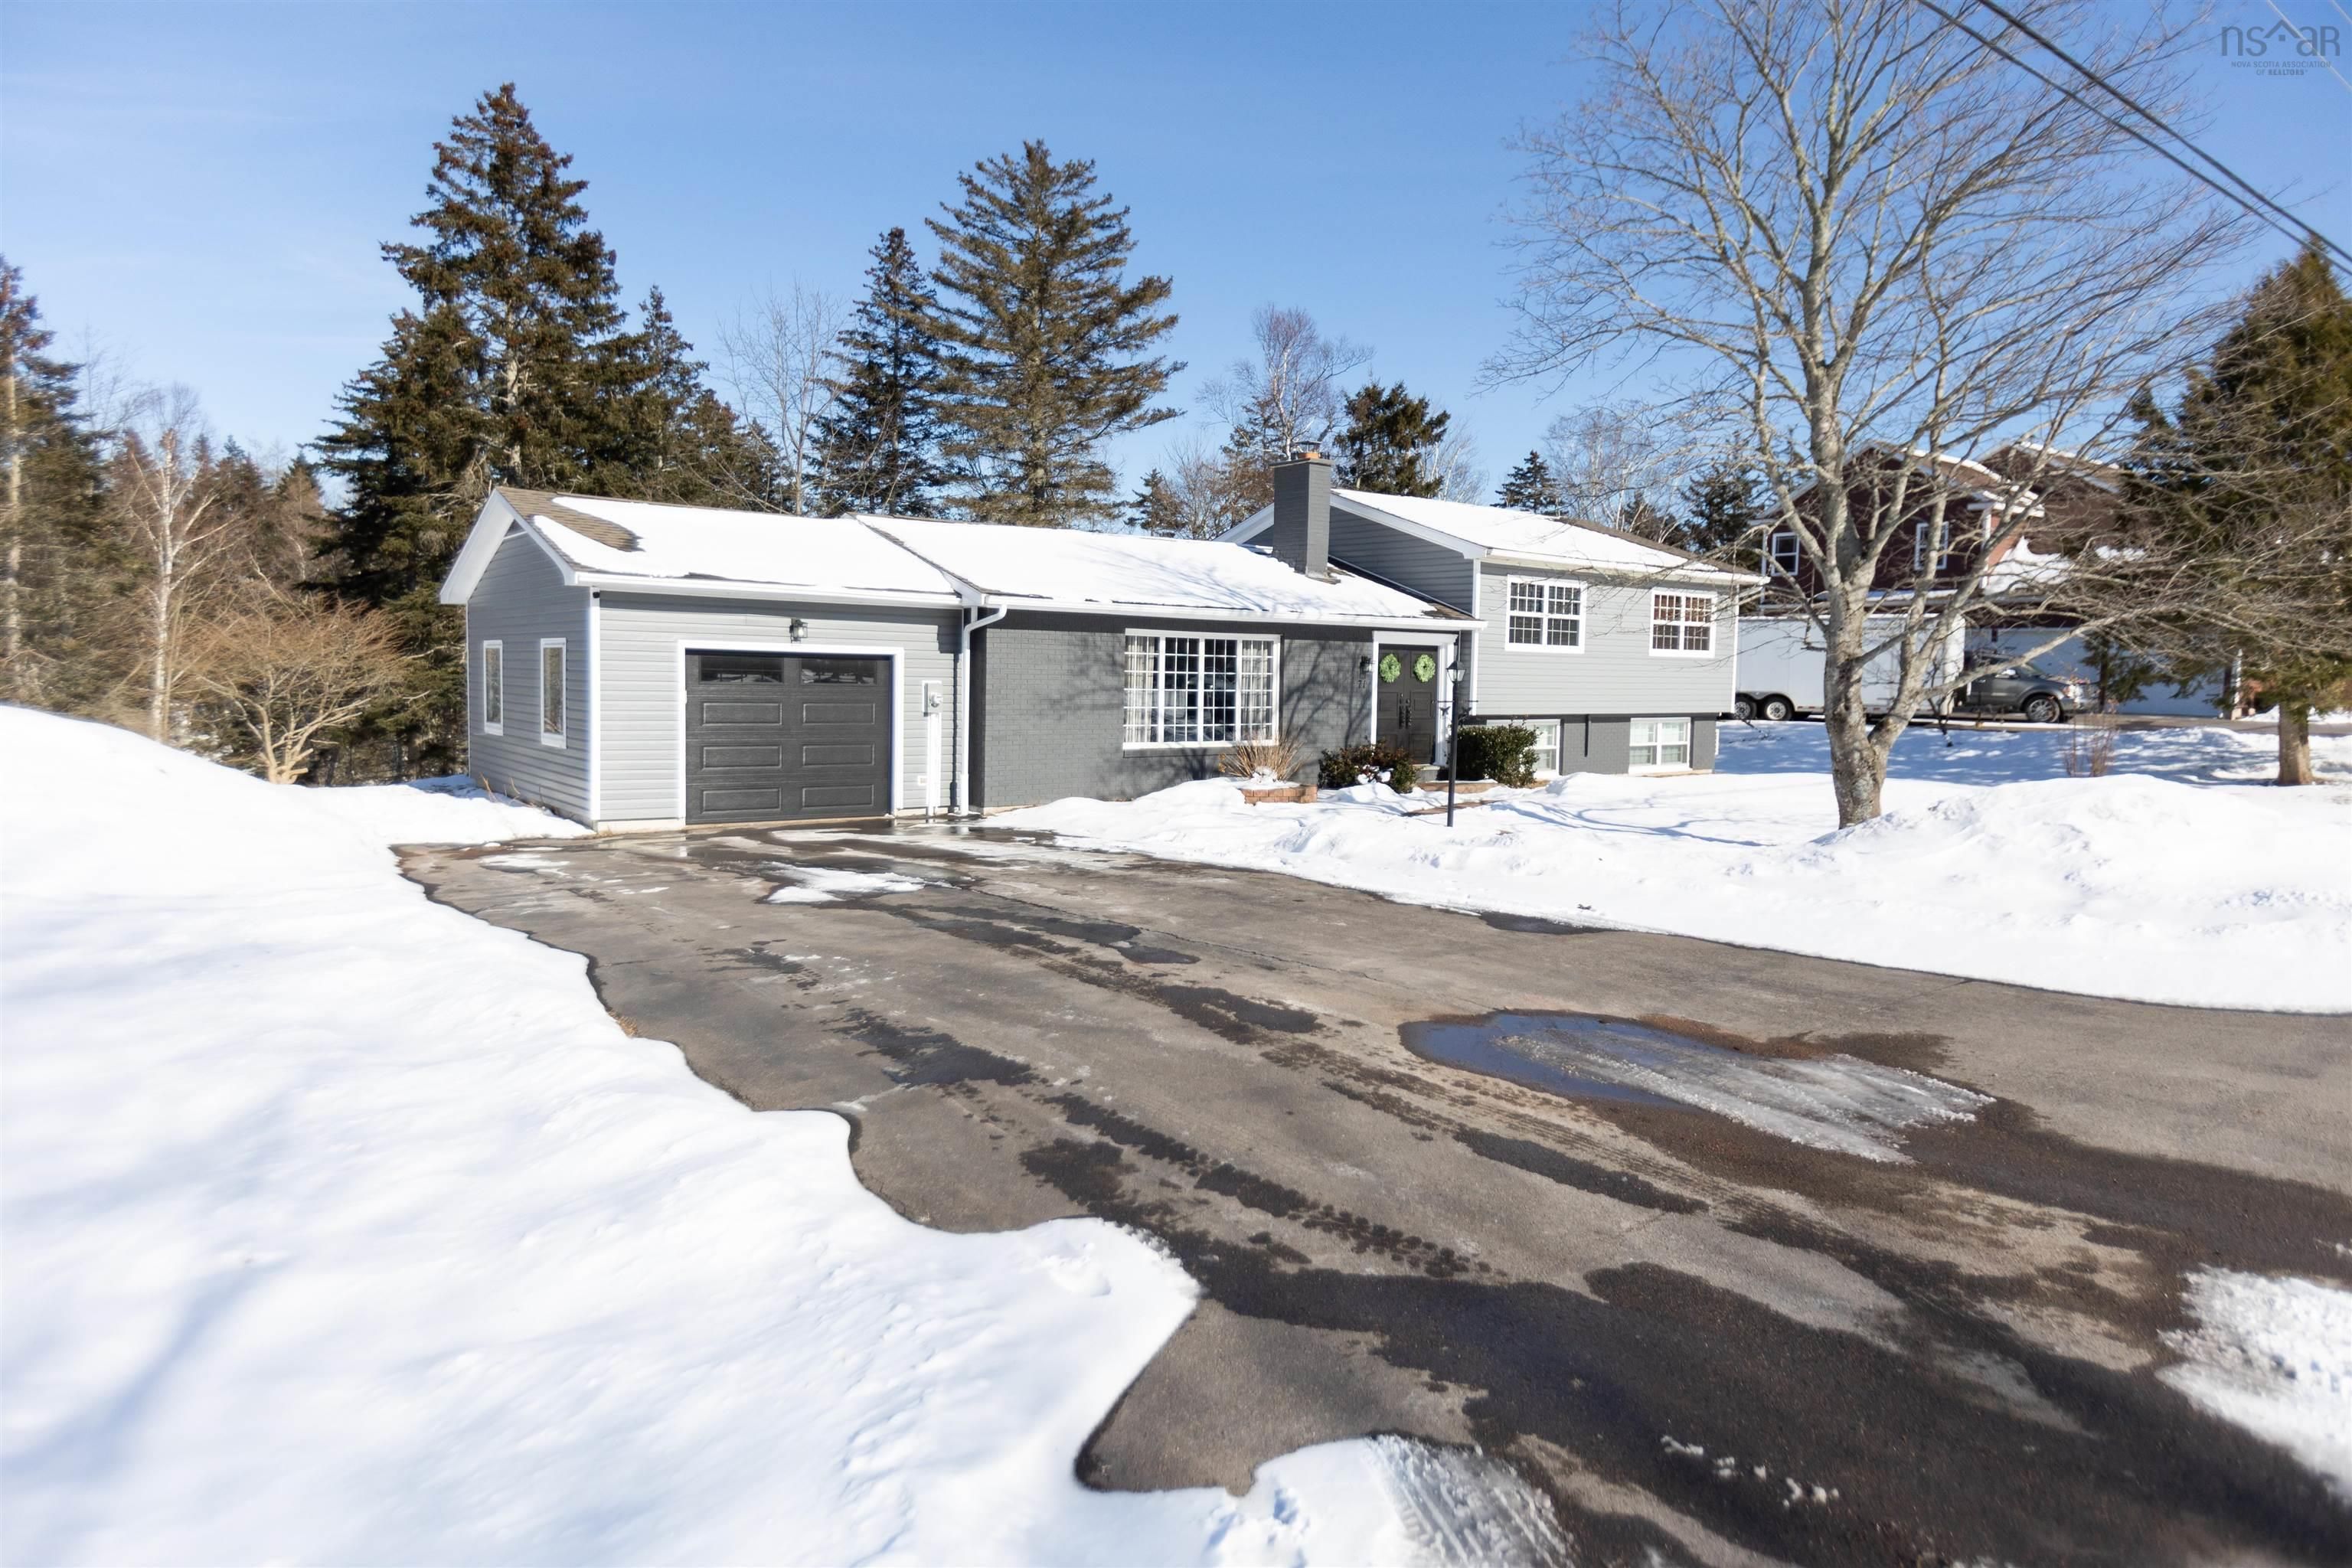 Main Photo: 71 Biggs Drive in East Amherst: 101-Amherst, Brookdale, Warren Residential for sale (Northern Region)  : MLS®# 202203254